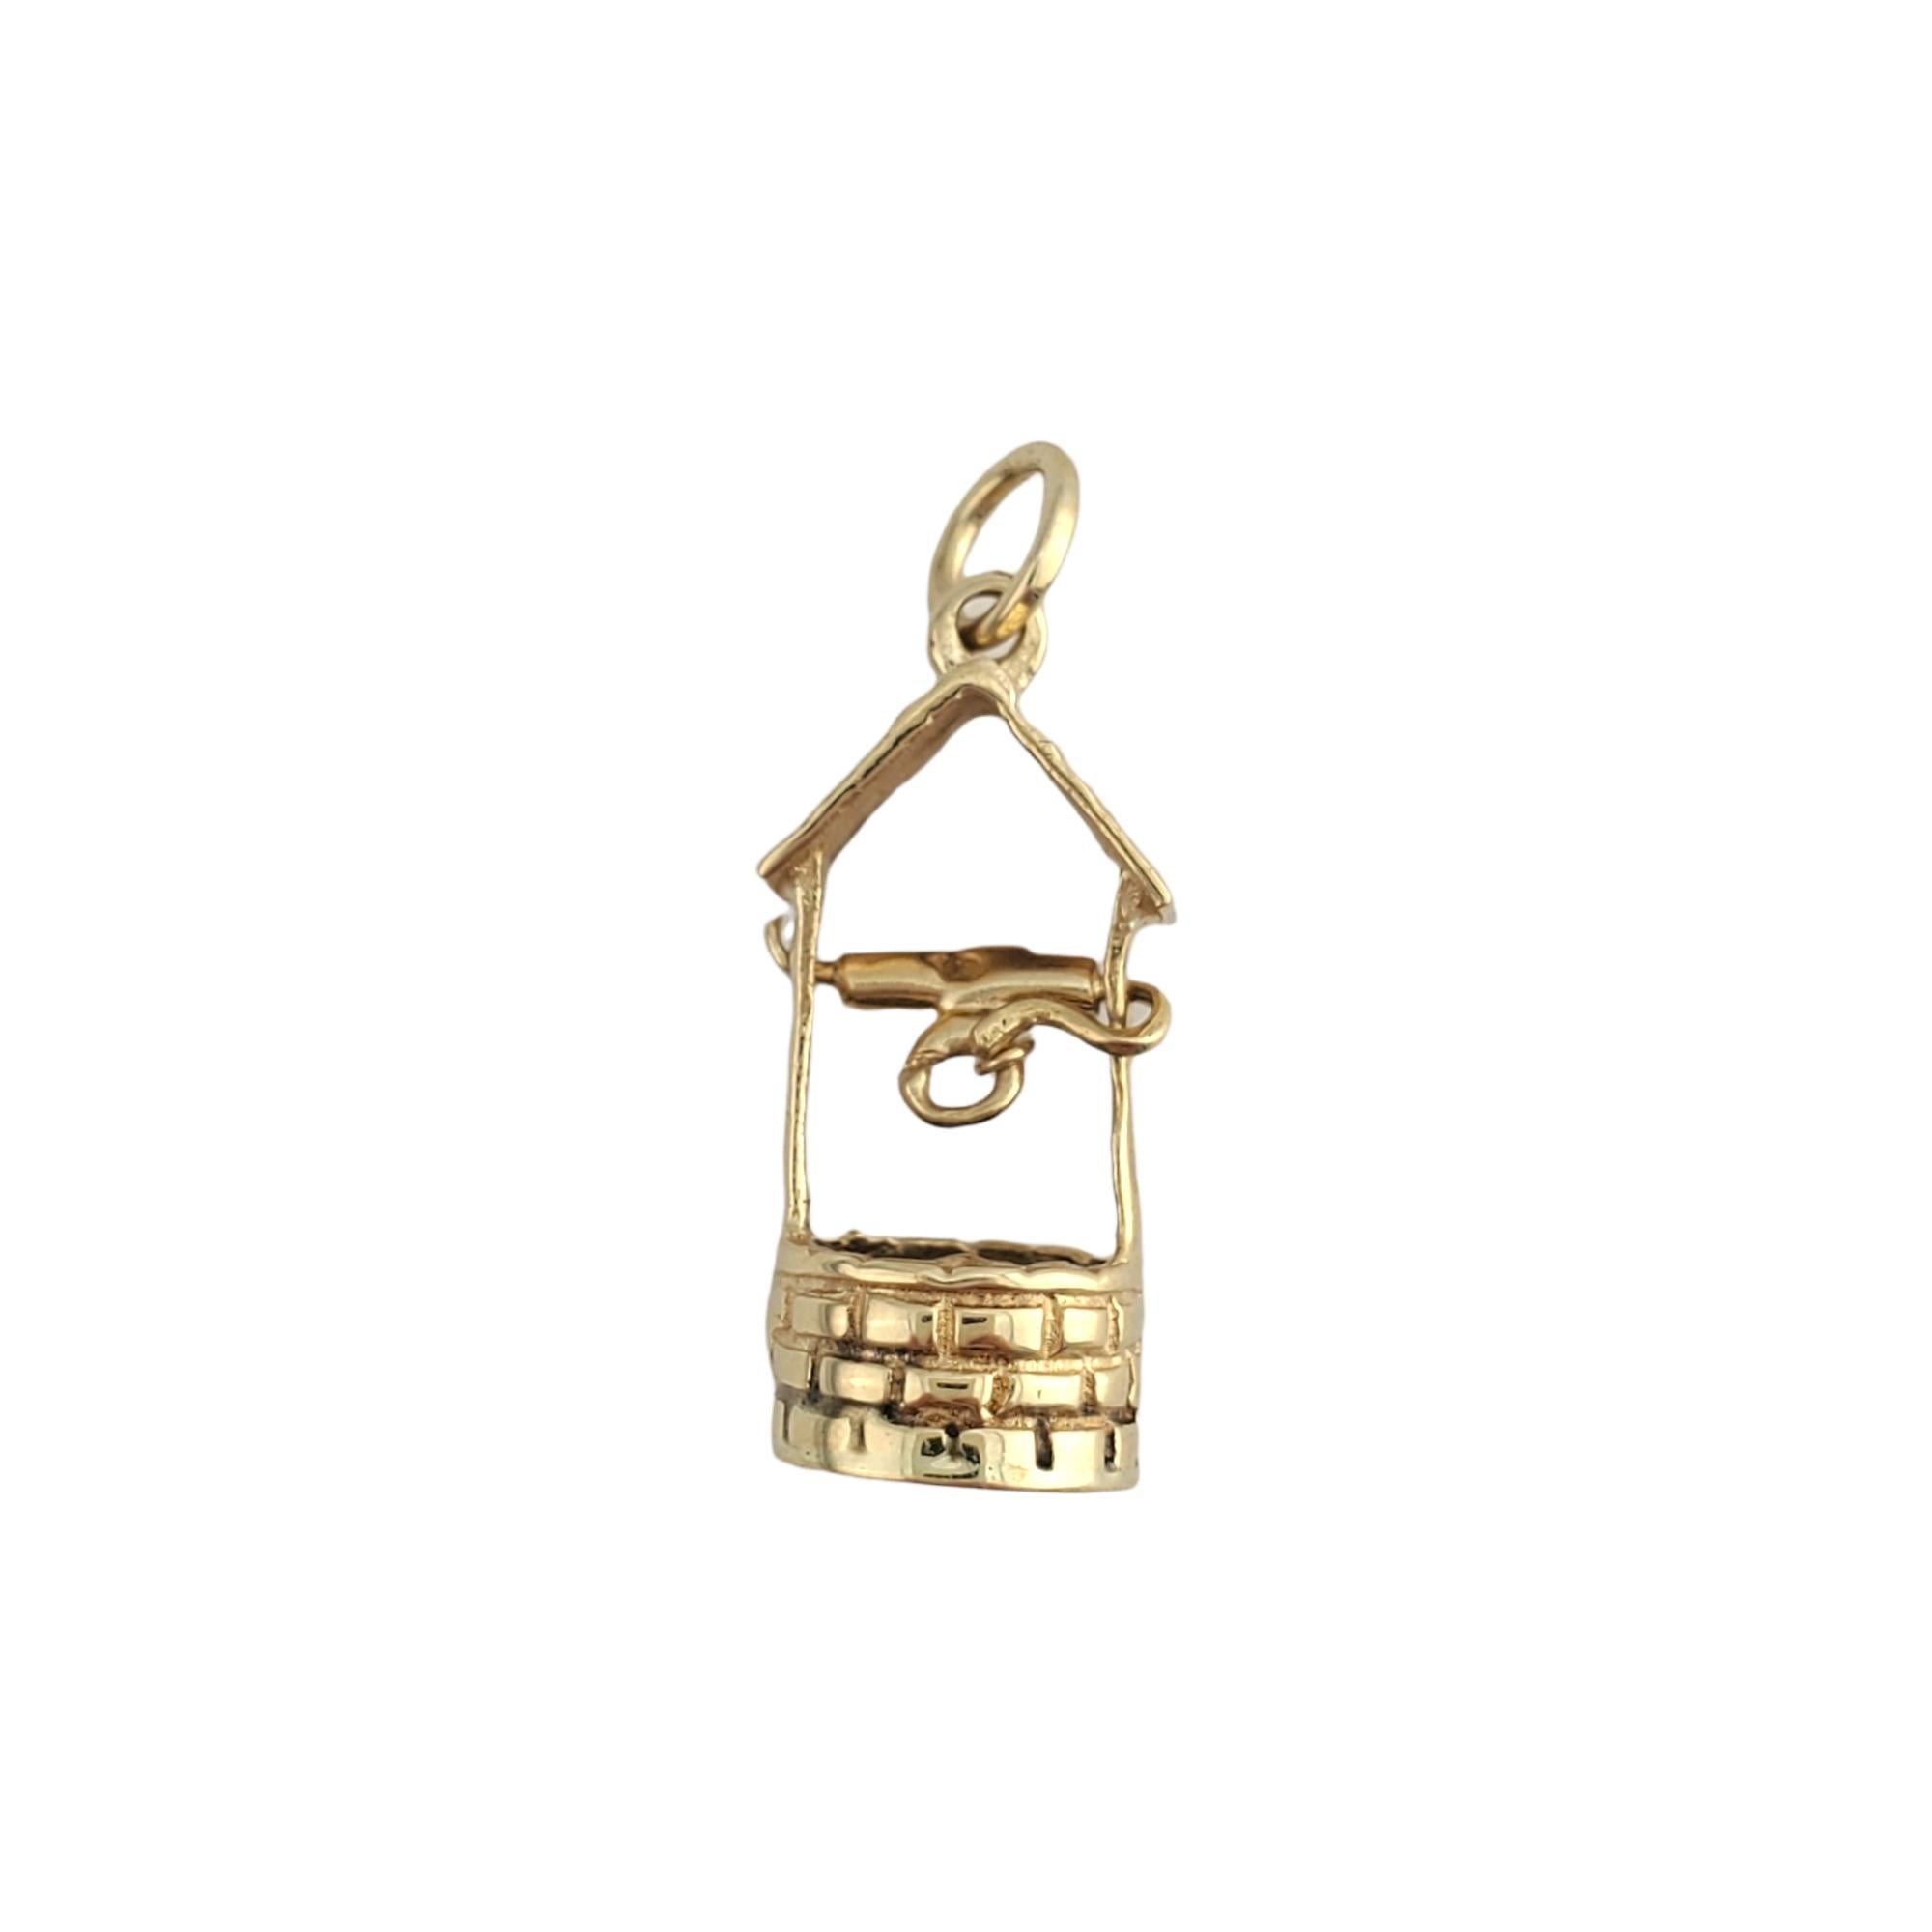 Vintage 14K Yellow Gold Well Charm

Make a wish on this wishing well! 

Meticulously detailed yellow gold well charm featuring chain with no bucket.

Size: 20 mm X 8 mm

Weight: 2.3 g/ 1.4 dwt

Hallmark: 14K

Very good condition, professionally